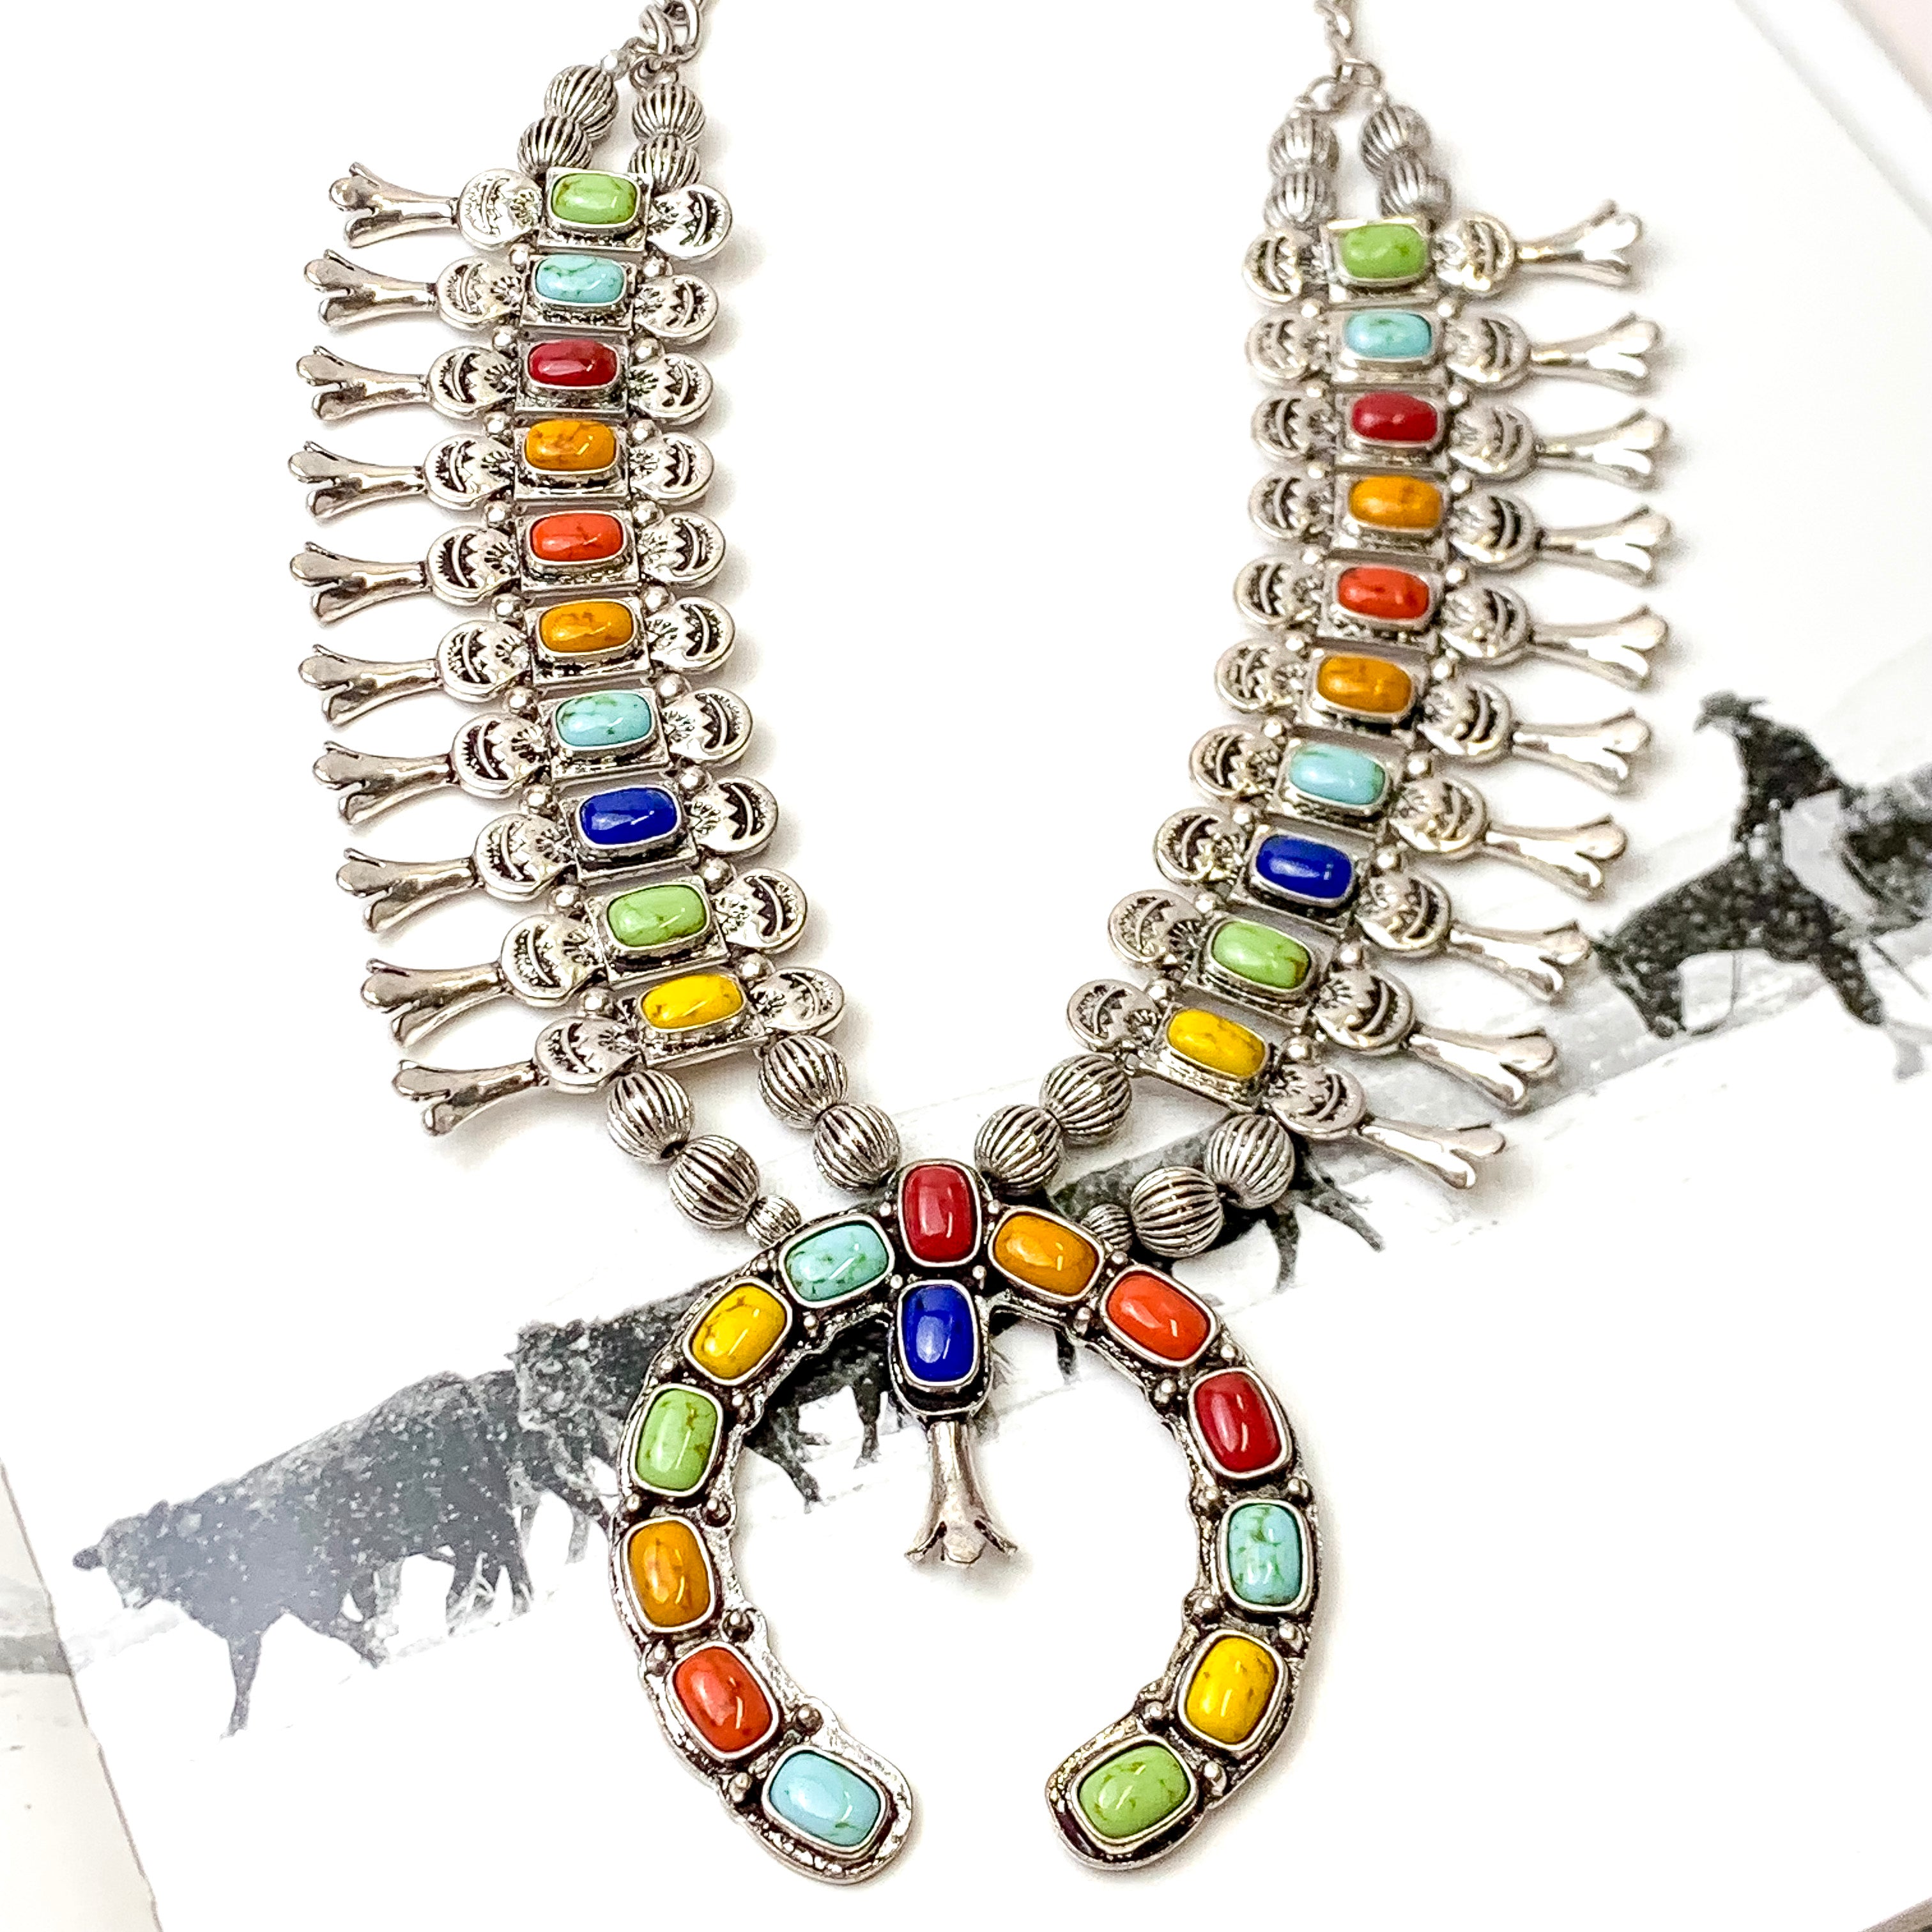 Silver Tone Chain Squash Blossom Necklace with Naja Pendant in Multicolor - Giddy Up Glamour Boutique